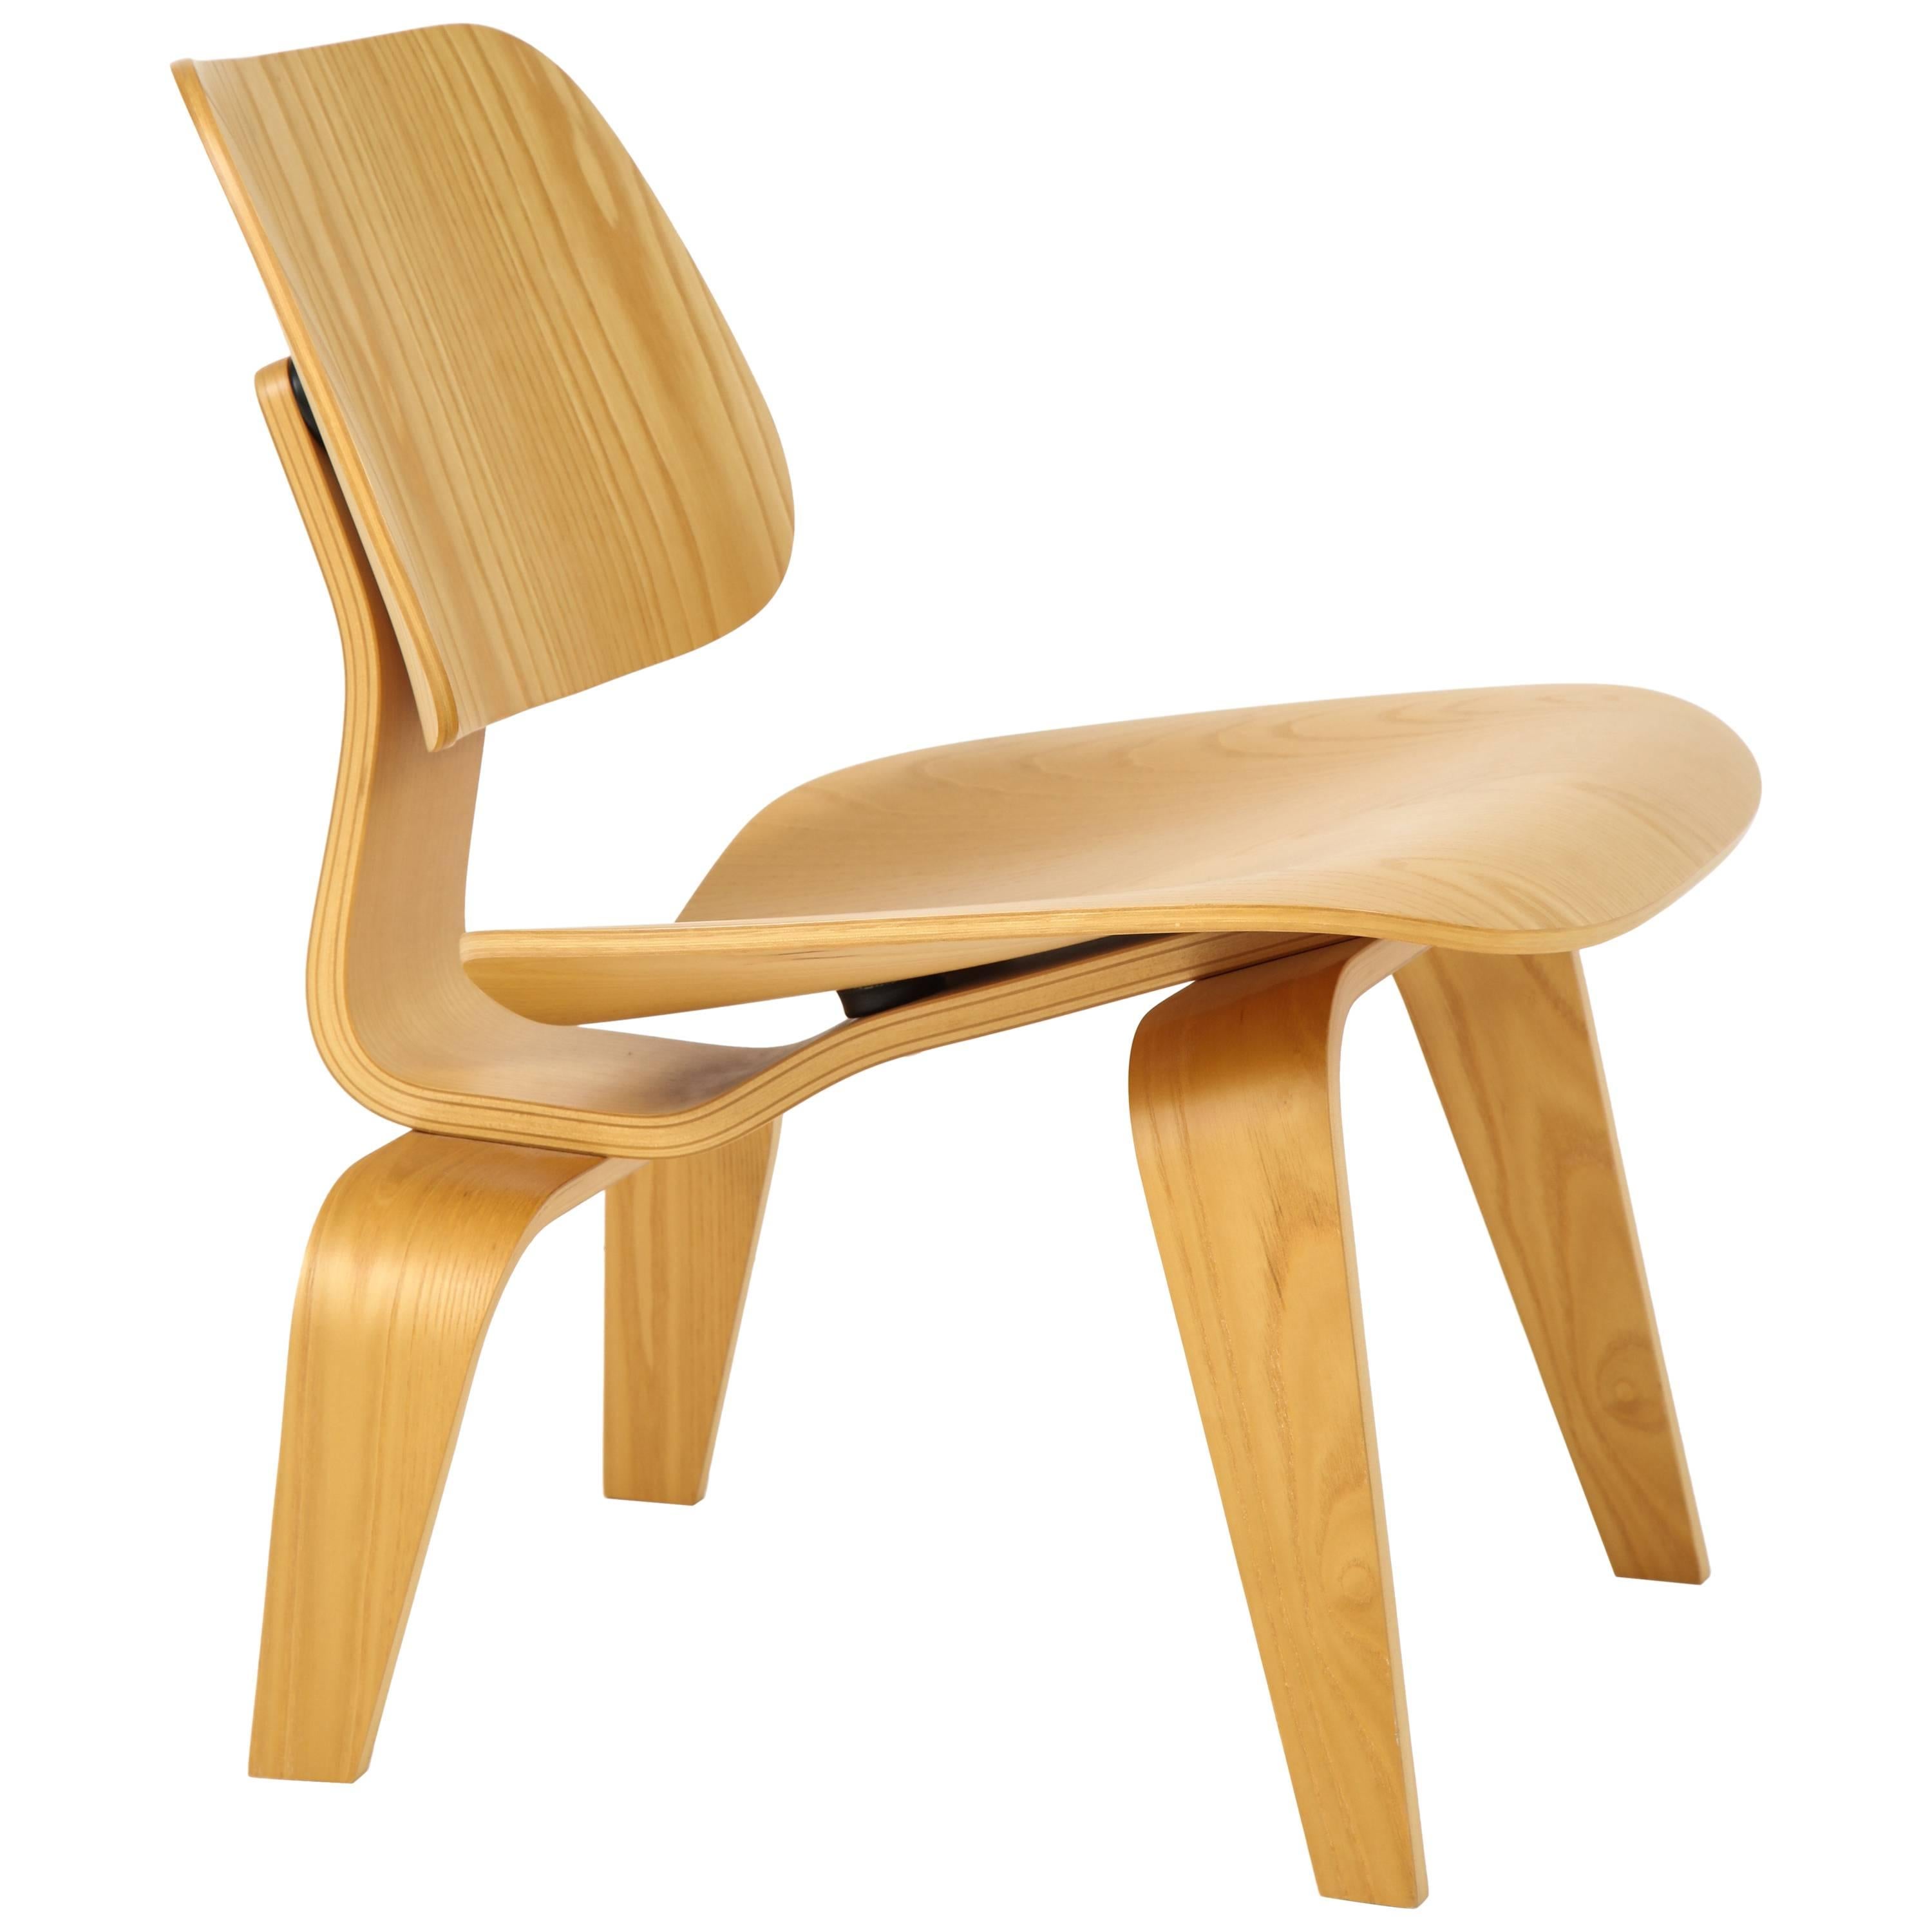 LCW by Charles Eames for Herman Miller